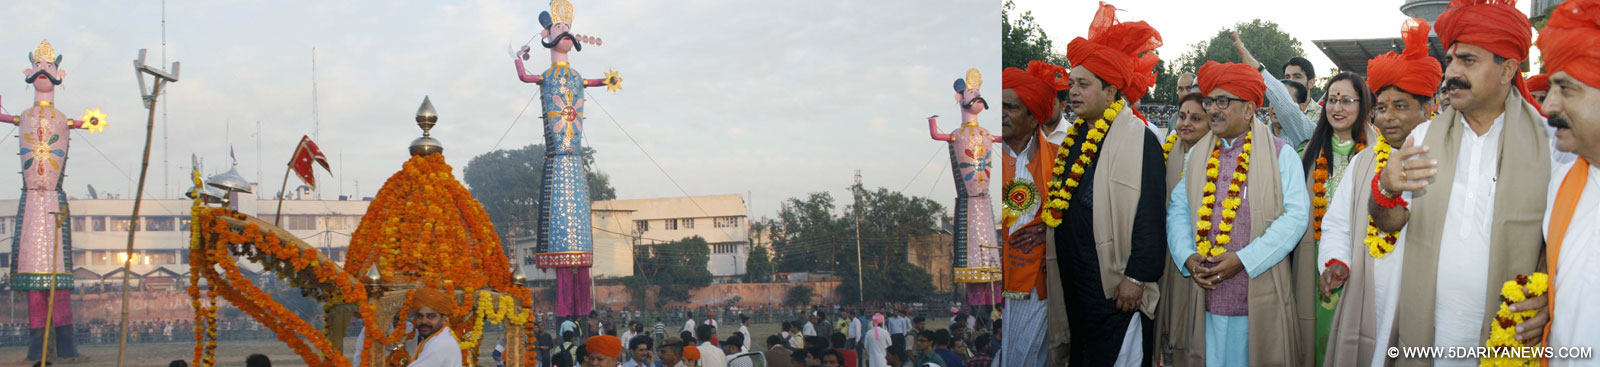 Message of Dussehra more relevant in the present days: Dr. Nirmal Singh